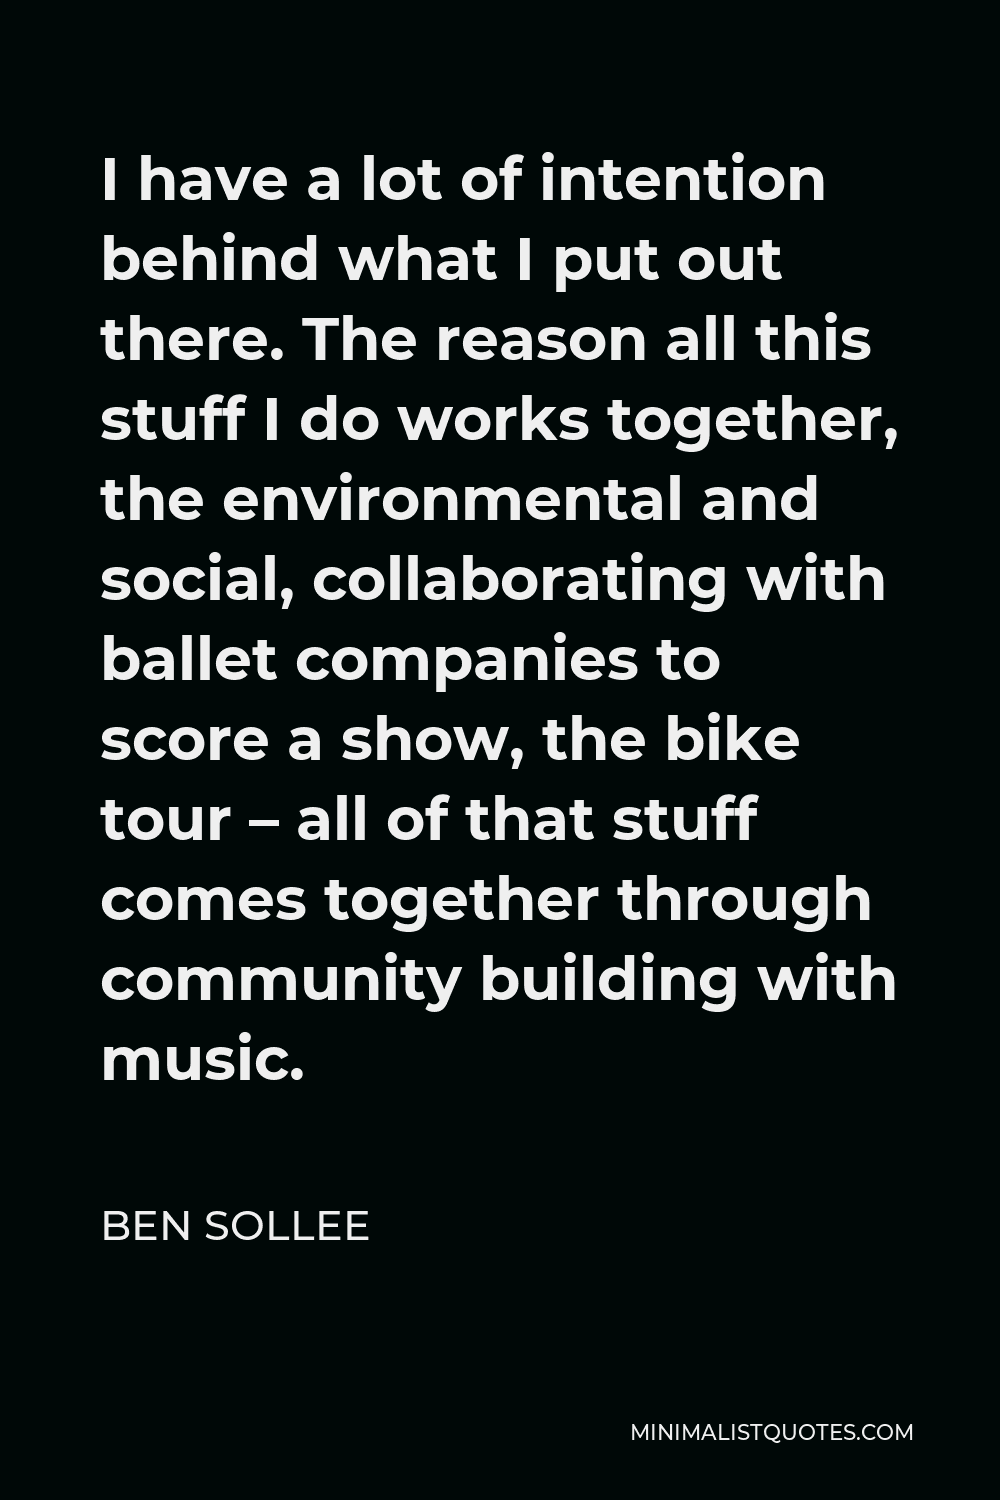 Ben Sollee Quote - I have a lot of intention behind what I put out there. The reason all this stuff I do works together, the environmental and social, collaborating with ballet companies to score a show, the bike tour – all of that stuff comes together through community building with music.